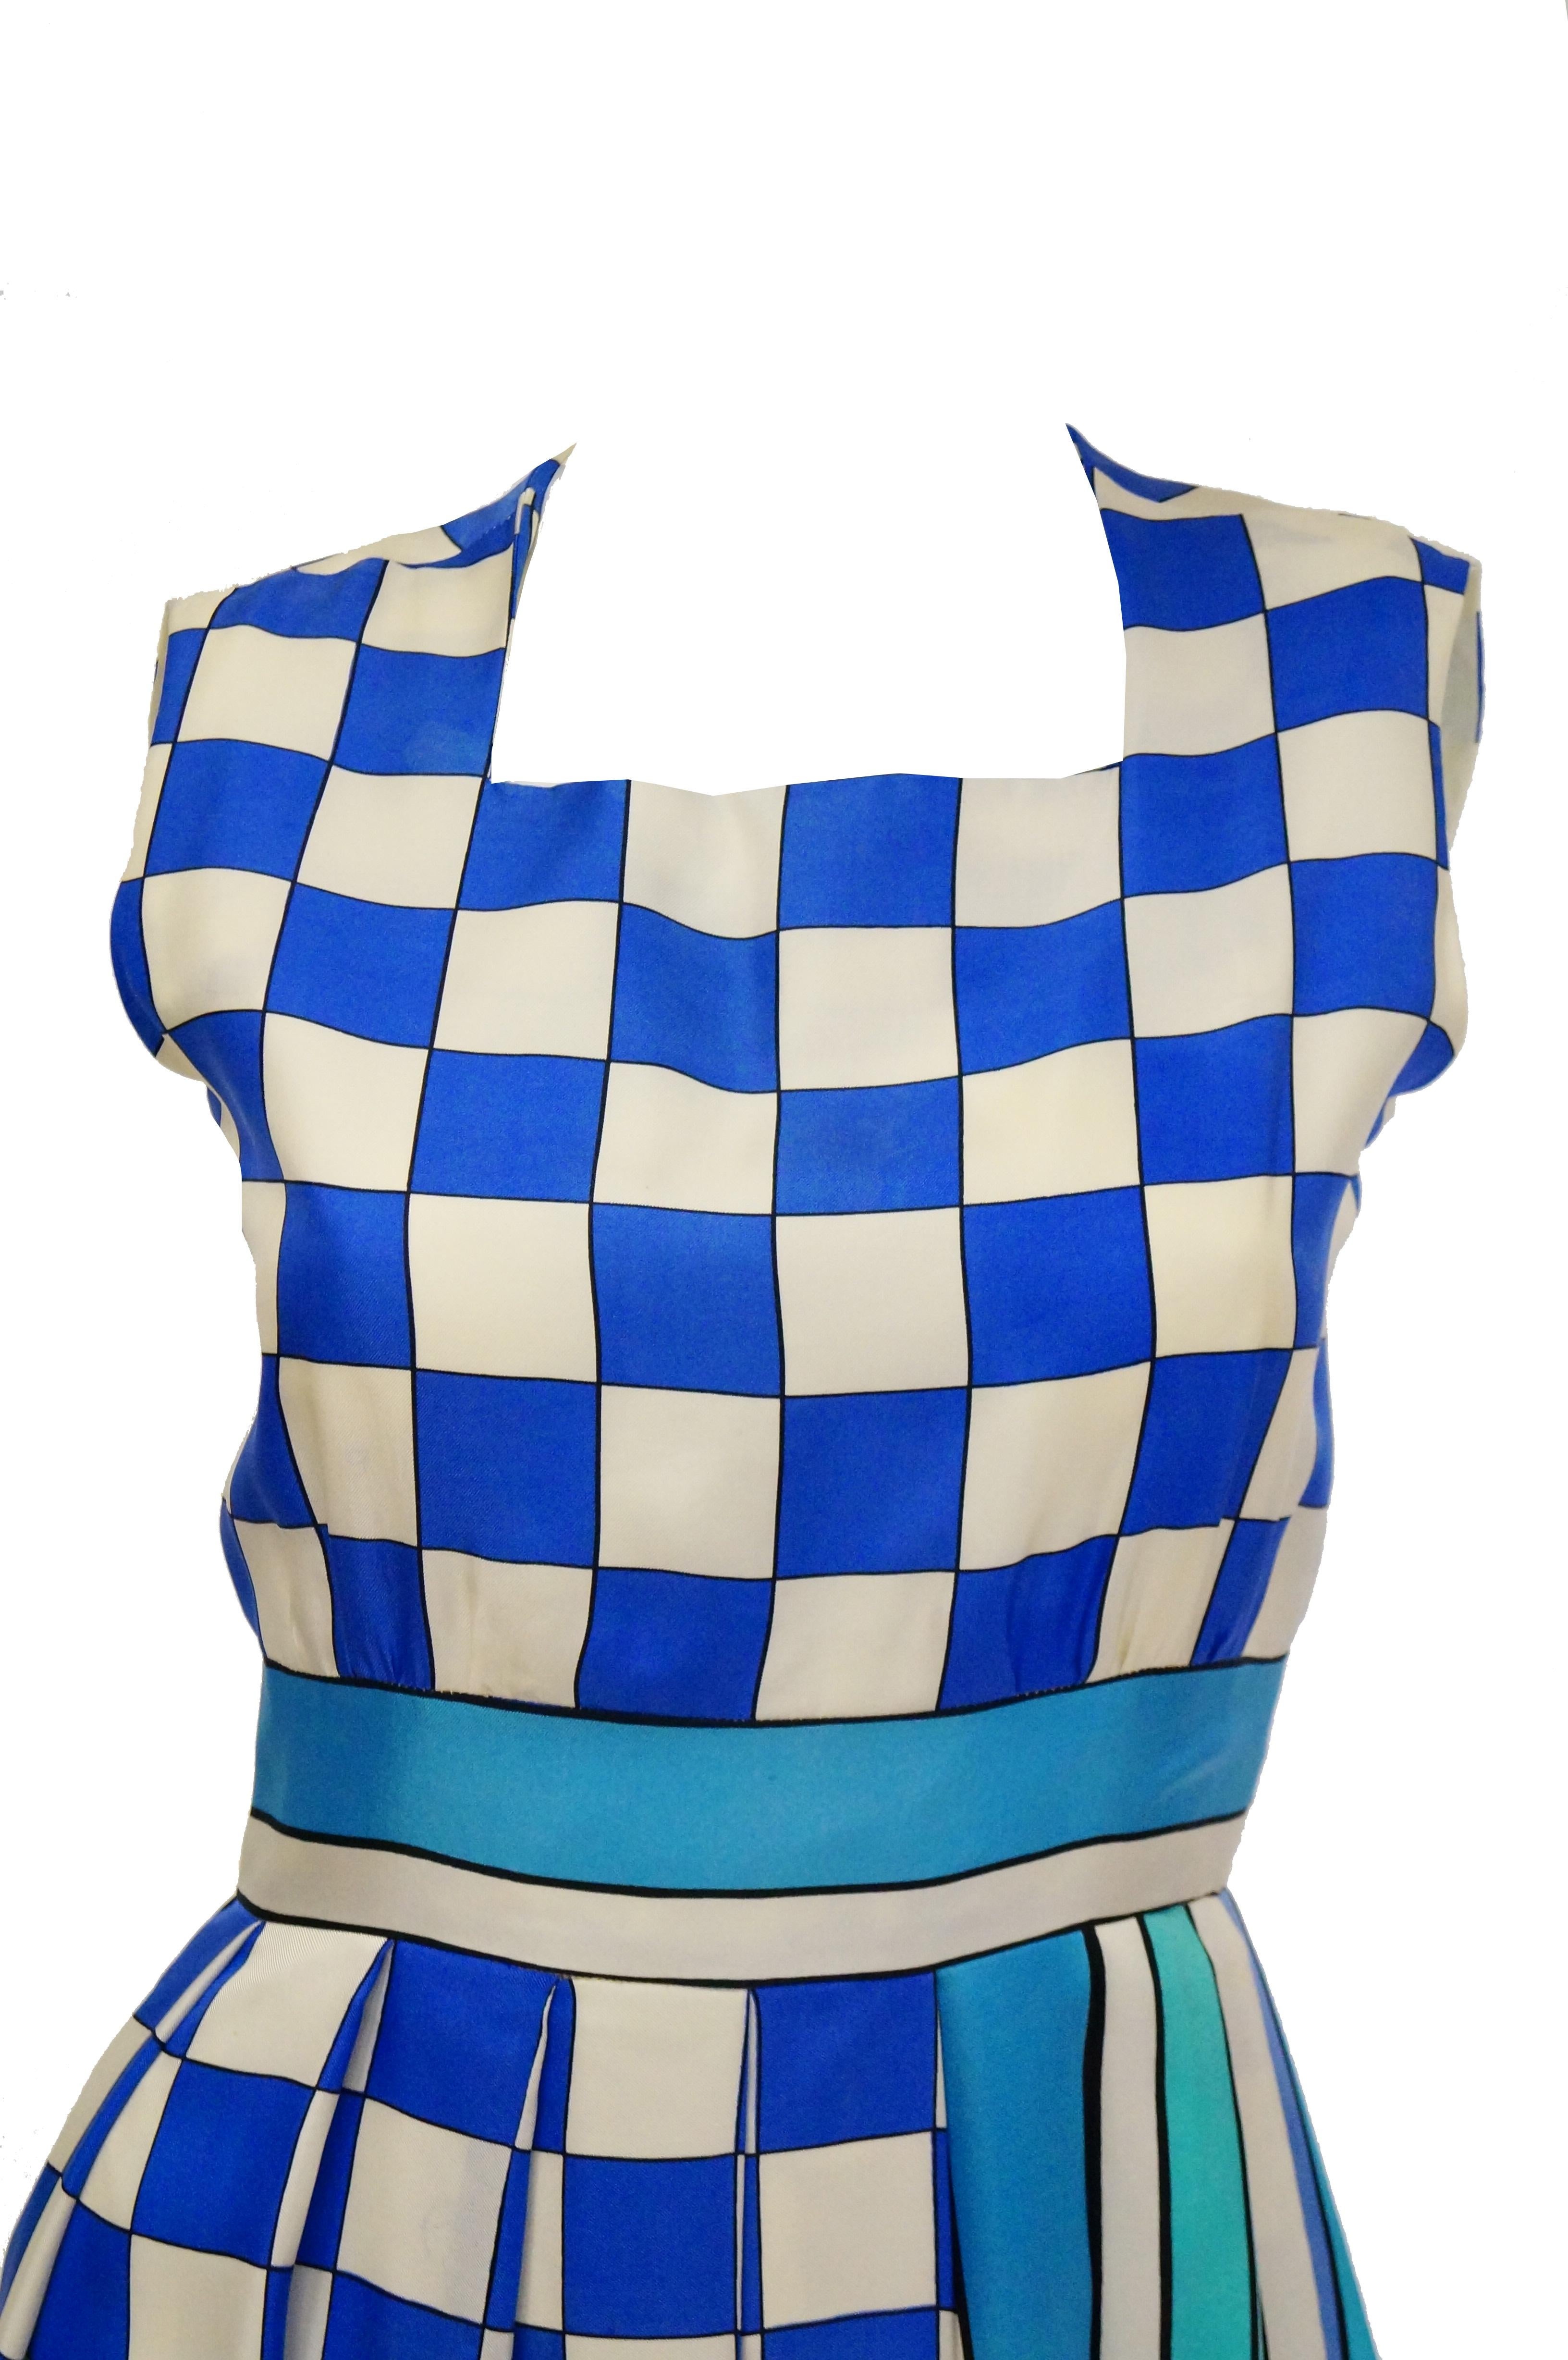 Fabulously fresh blue and white maxi dress by Tina Leser. The dress has a classic A - line silhouette, with wide skirt, no sleeves, and square neckline. The dress primarily features a checkerboard print in royal blue and white, accented by stripes